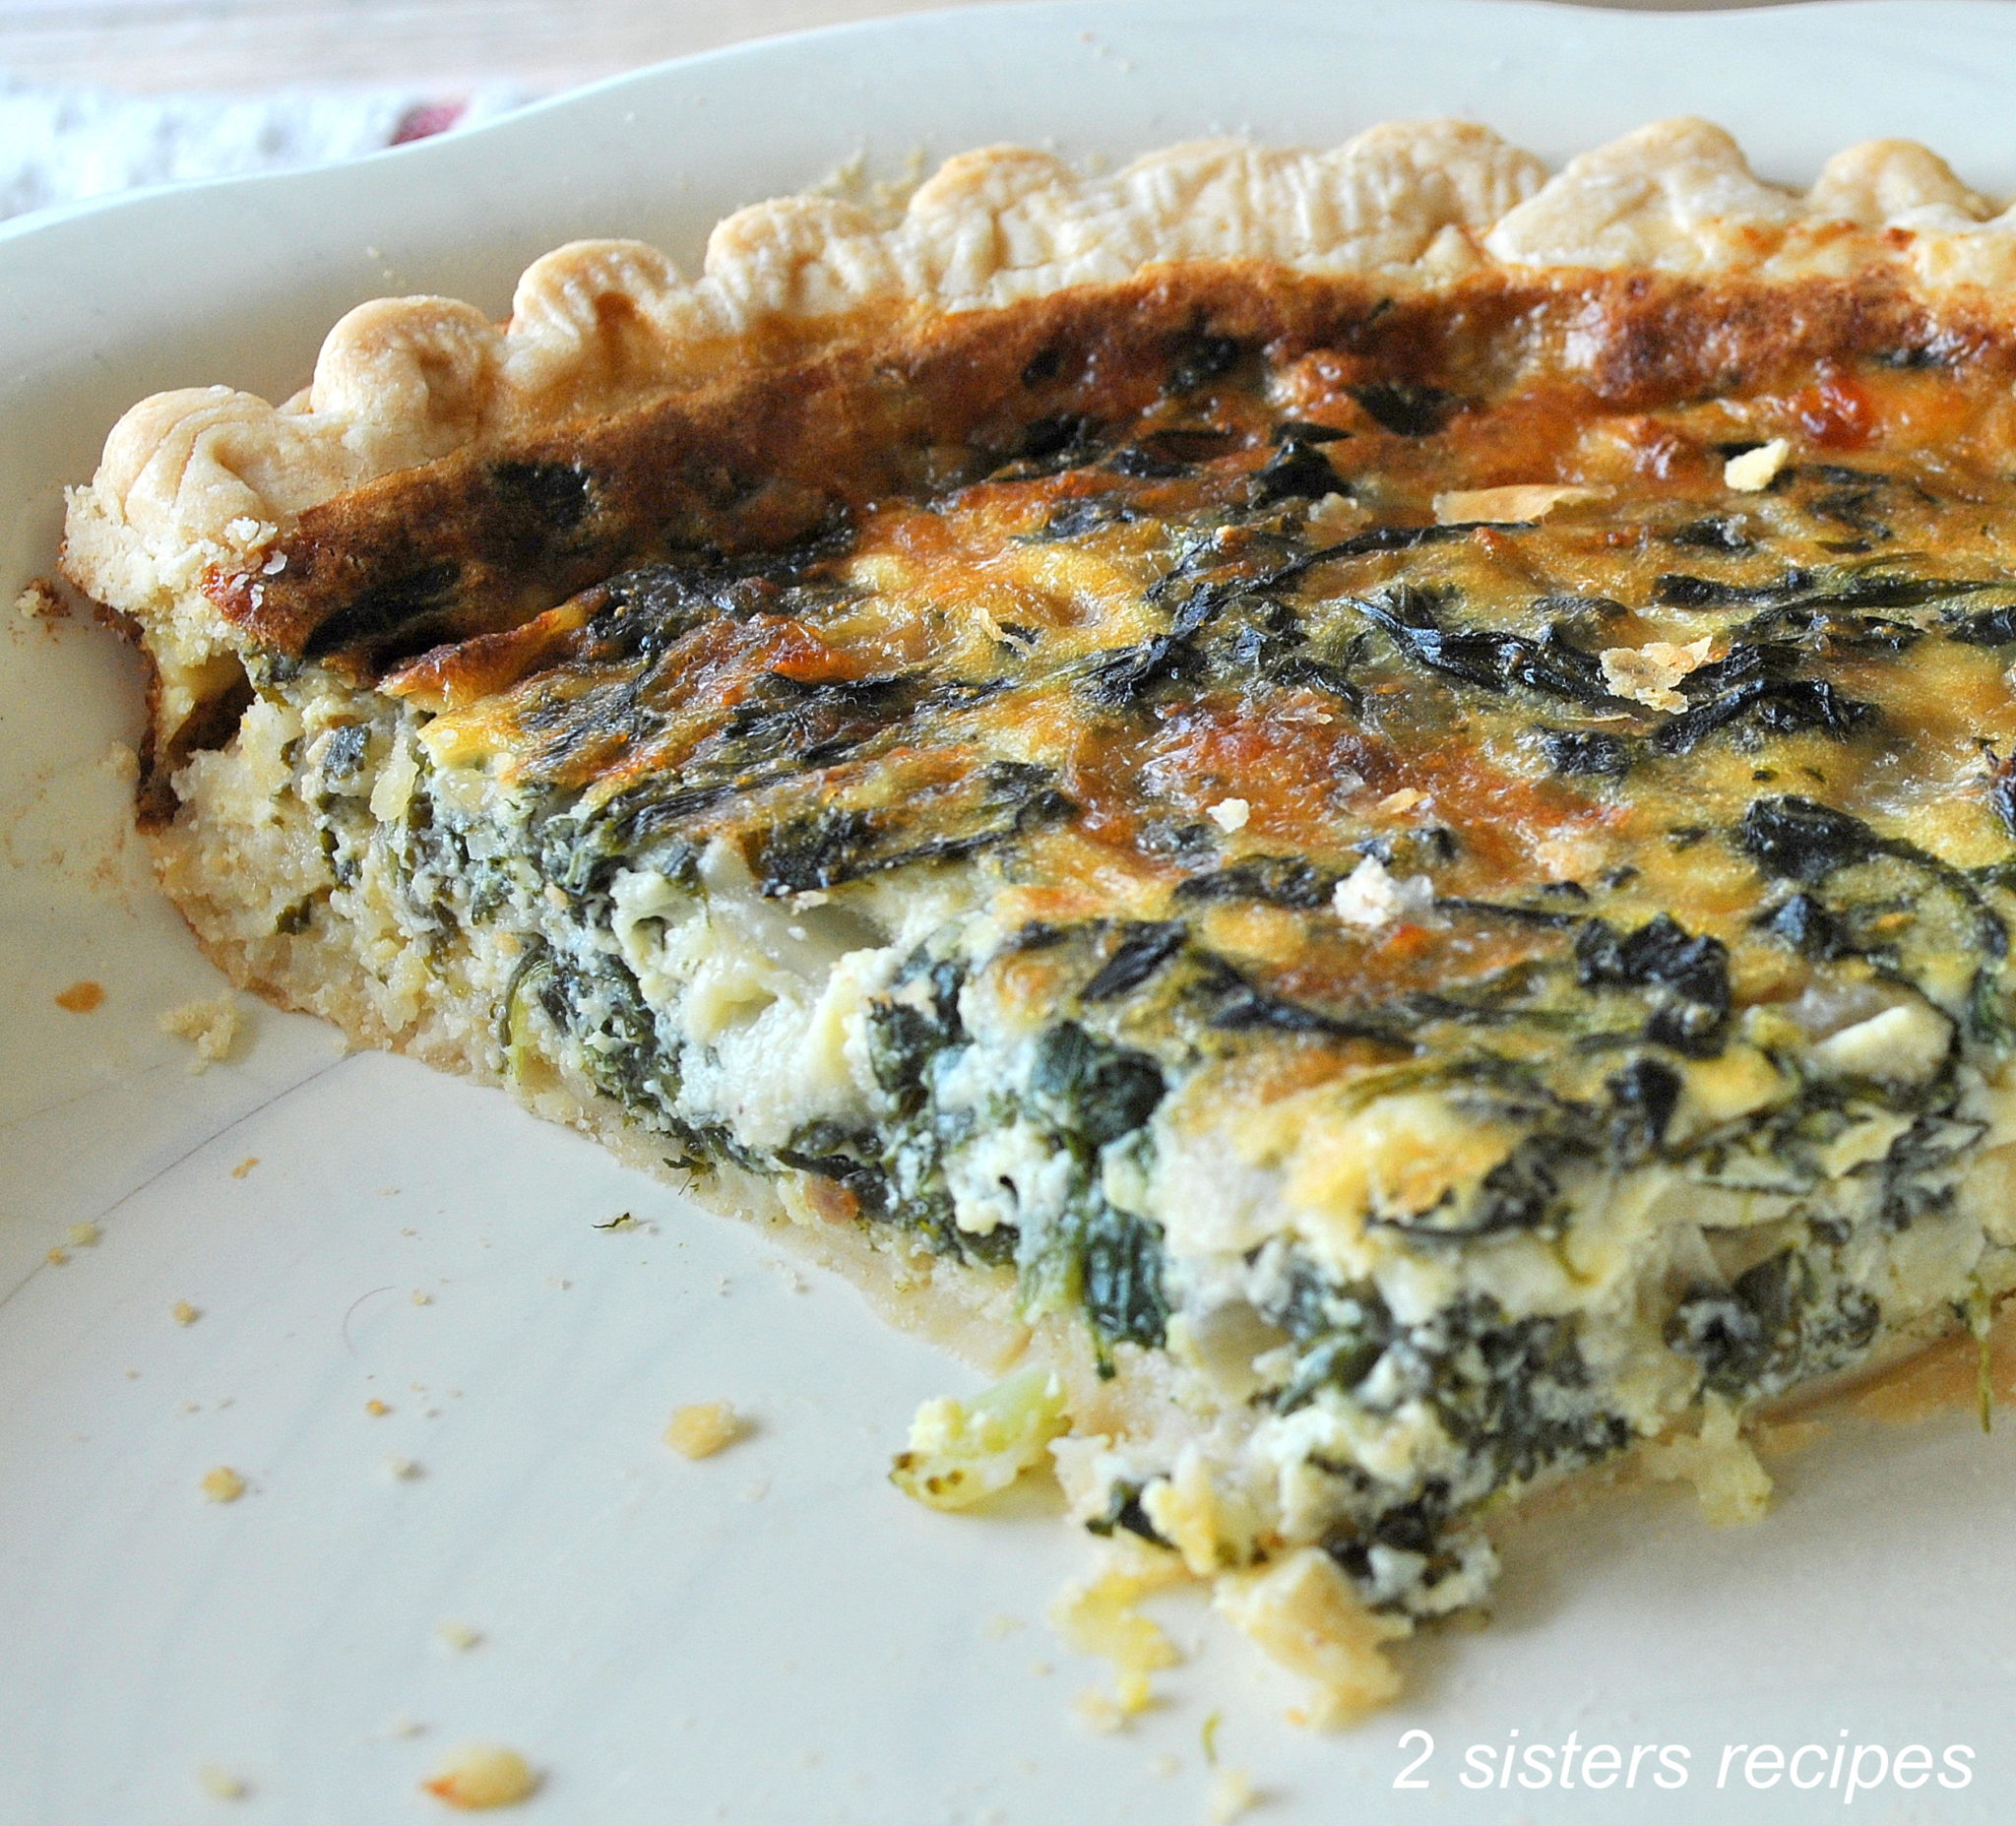 Spinach and Parmesan Quiche - 2 Sisters Recipes by Anna and Liz